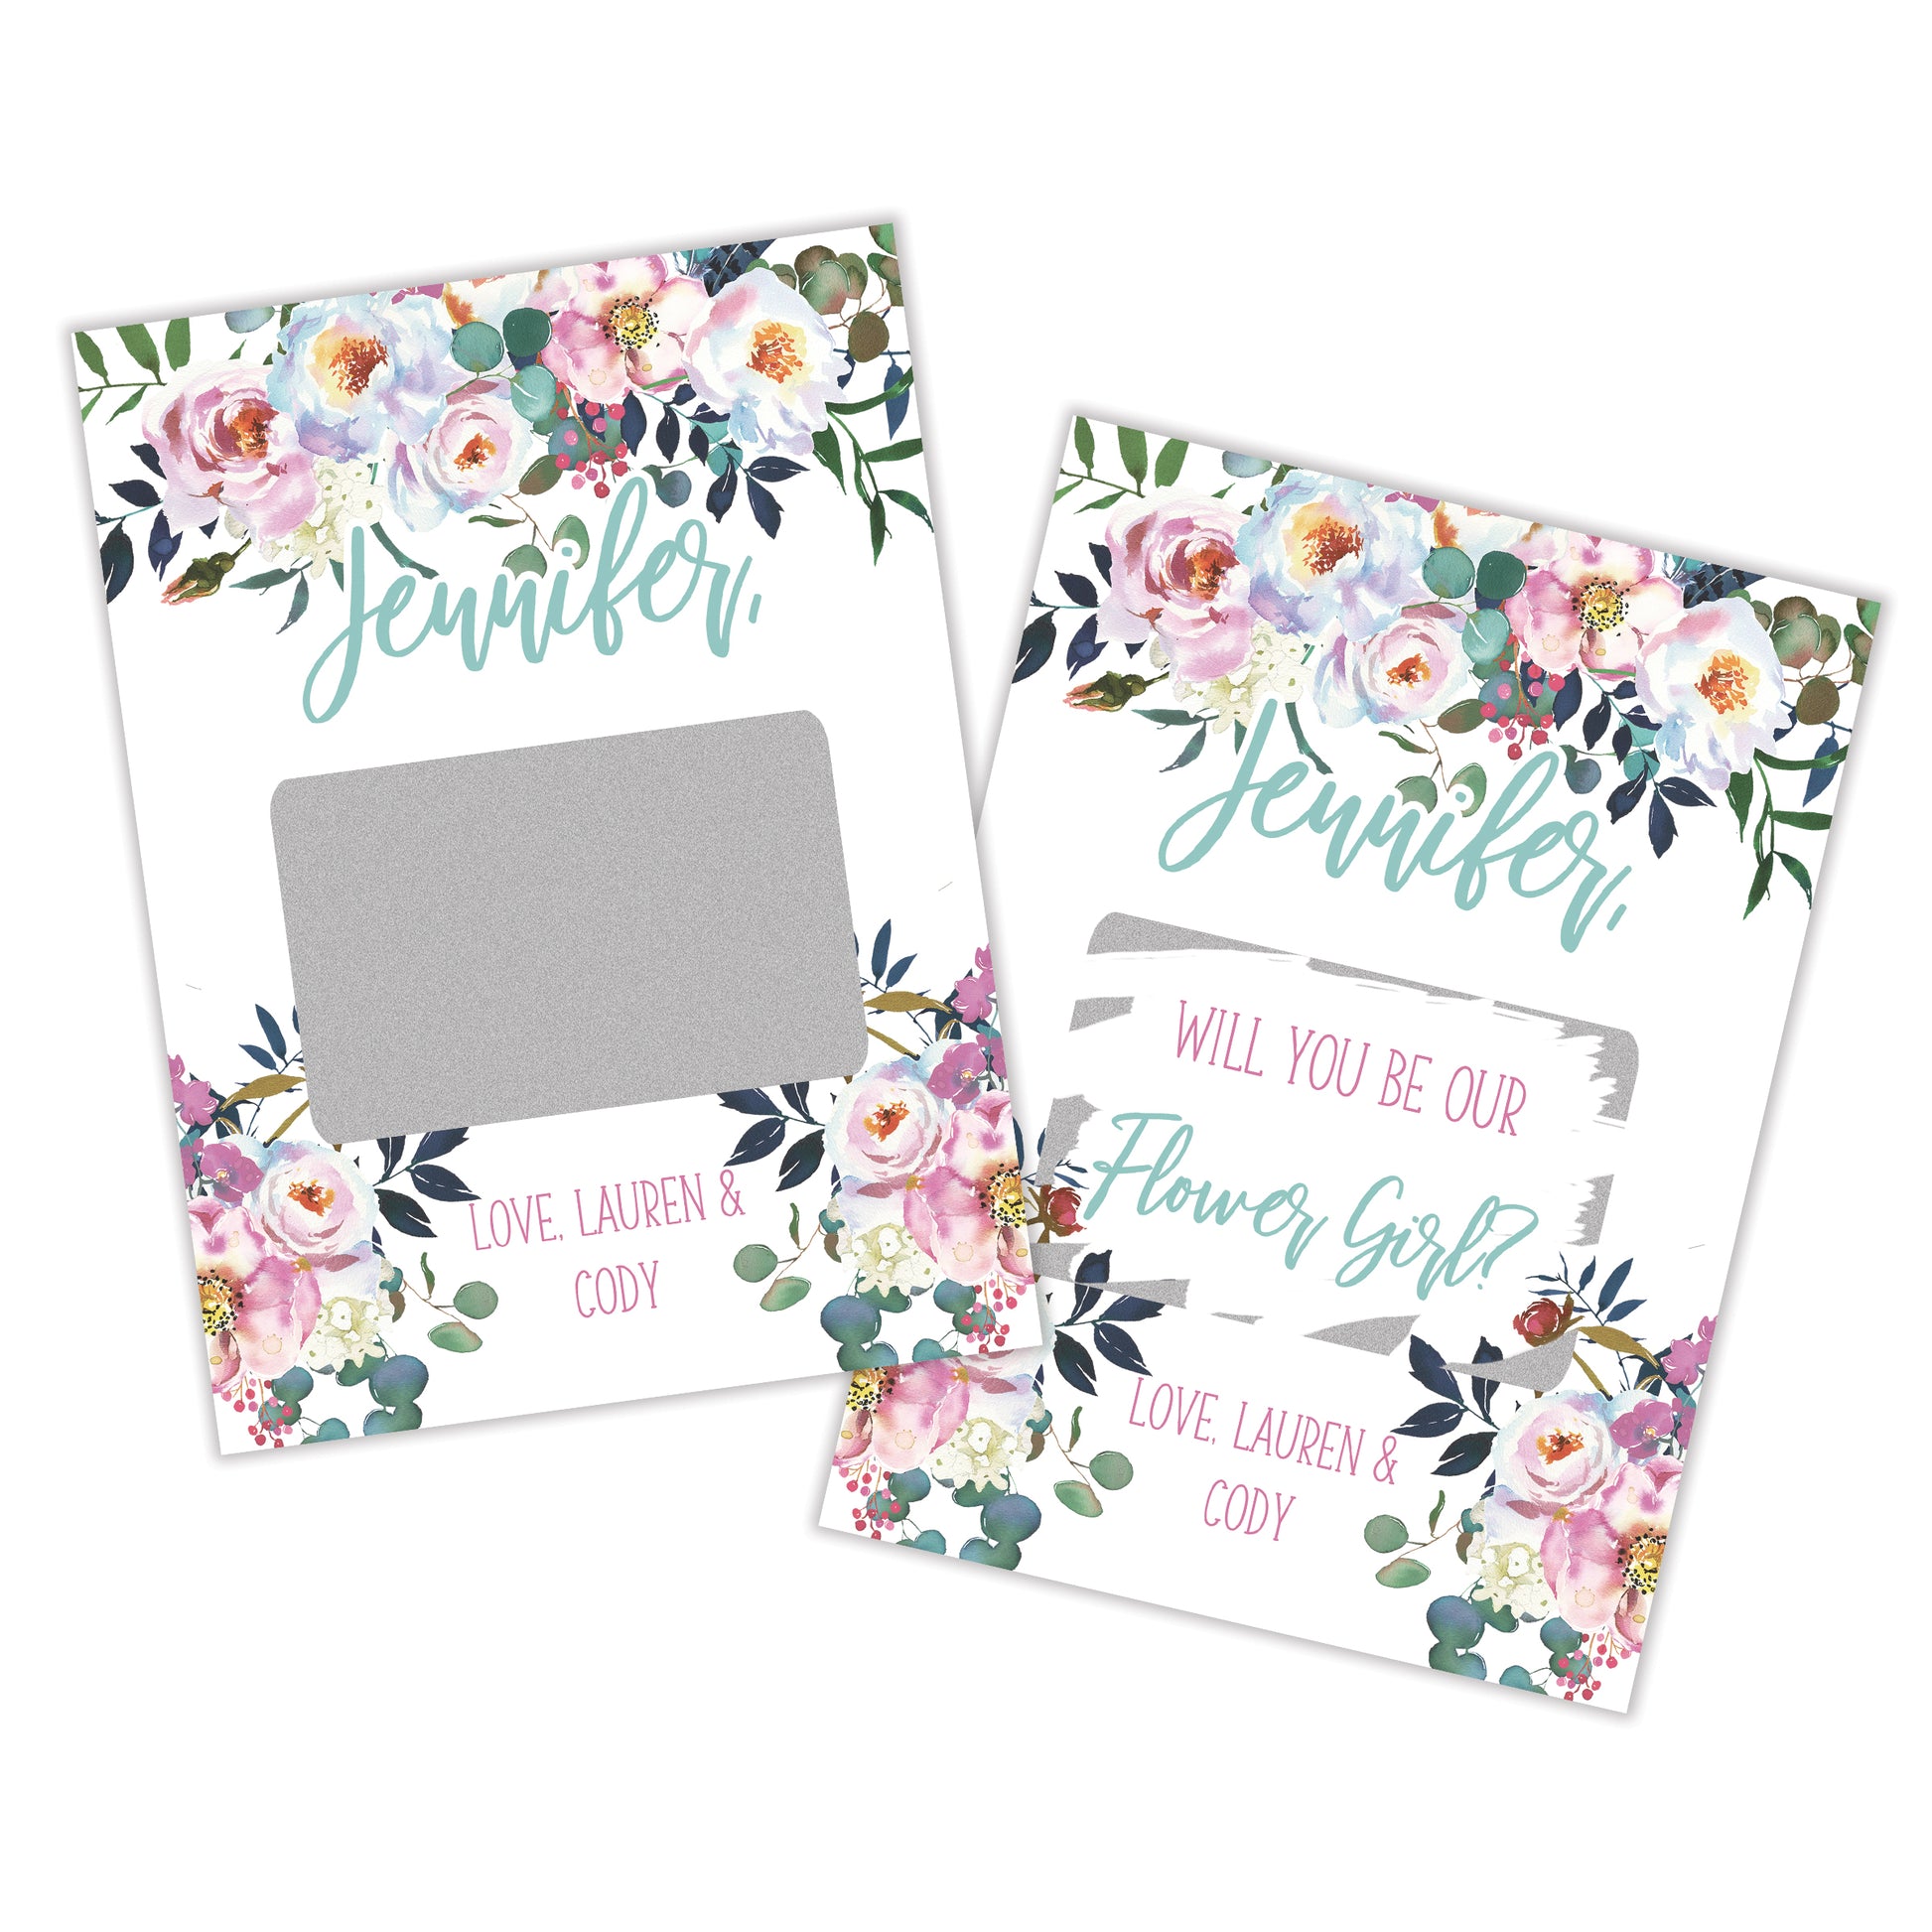 Personalized Flower Girl Scratch Off Card - SCA0017-SCA0022 | S'Berry Boutique